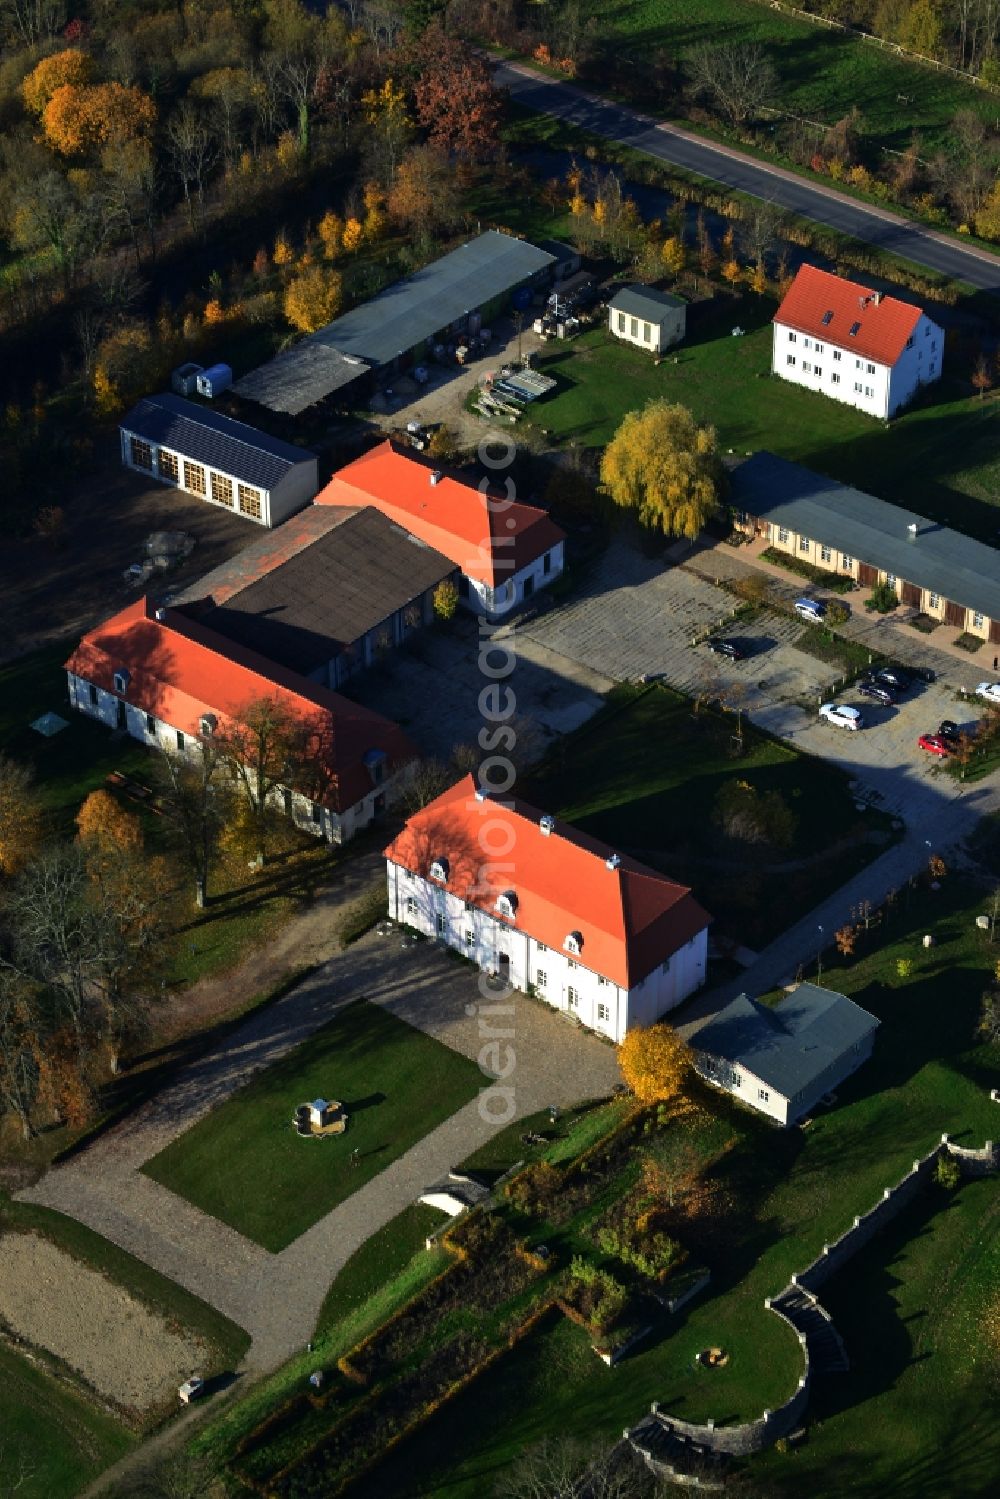 Aerial image Flieth-Stegelitz - Building complex with homestead. On Haussee located former castle with park. Now a hotel, restaurant and banquet hall in Flieth-Stegelitz in the state of Brandenburg